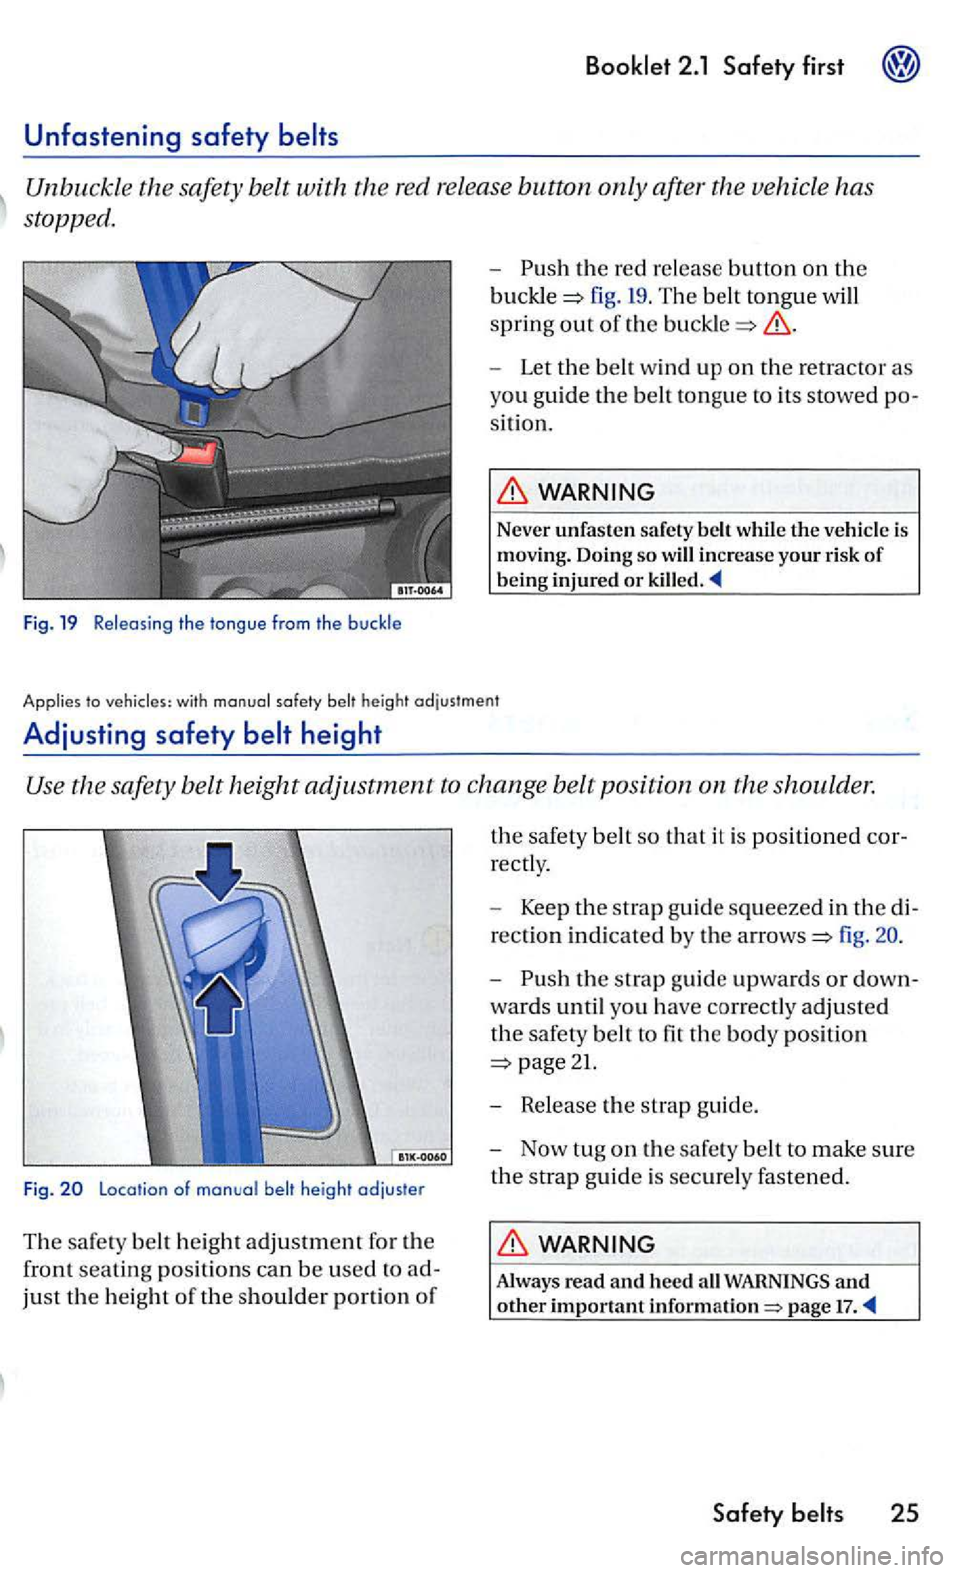 VOLKSWAGEN GOLF MK5 2006  Owners Manual Unbuckle the  safety  belt with the  red re lease  button  only after  the vehicle has 
stopp ed. 
Fig. 19  Relea sing the tongue from the  buckle 
-the red  re lease butto n on the 
fig.  19 . The  b